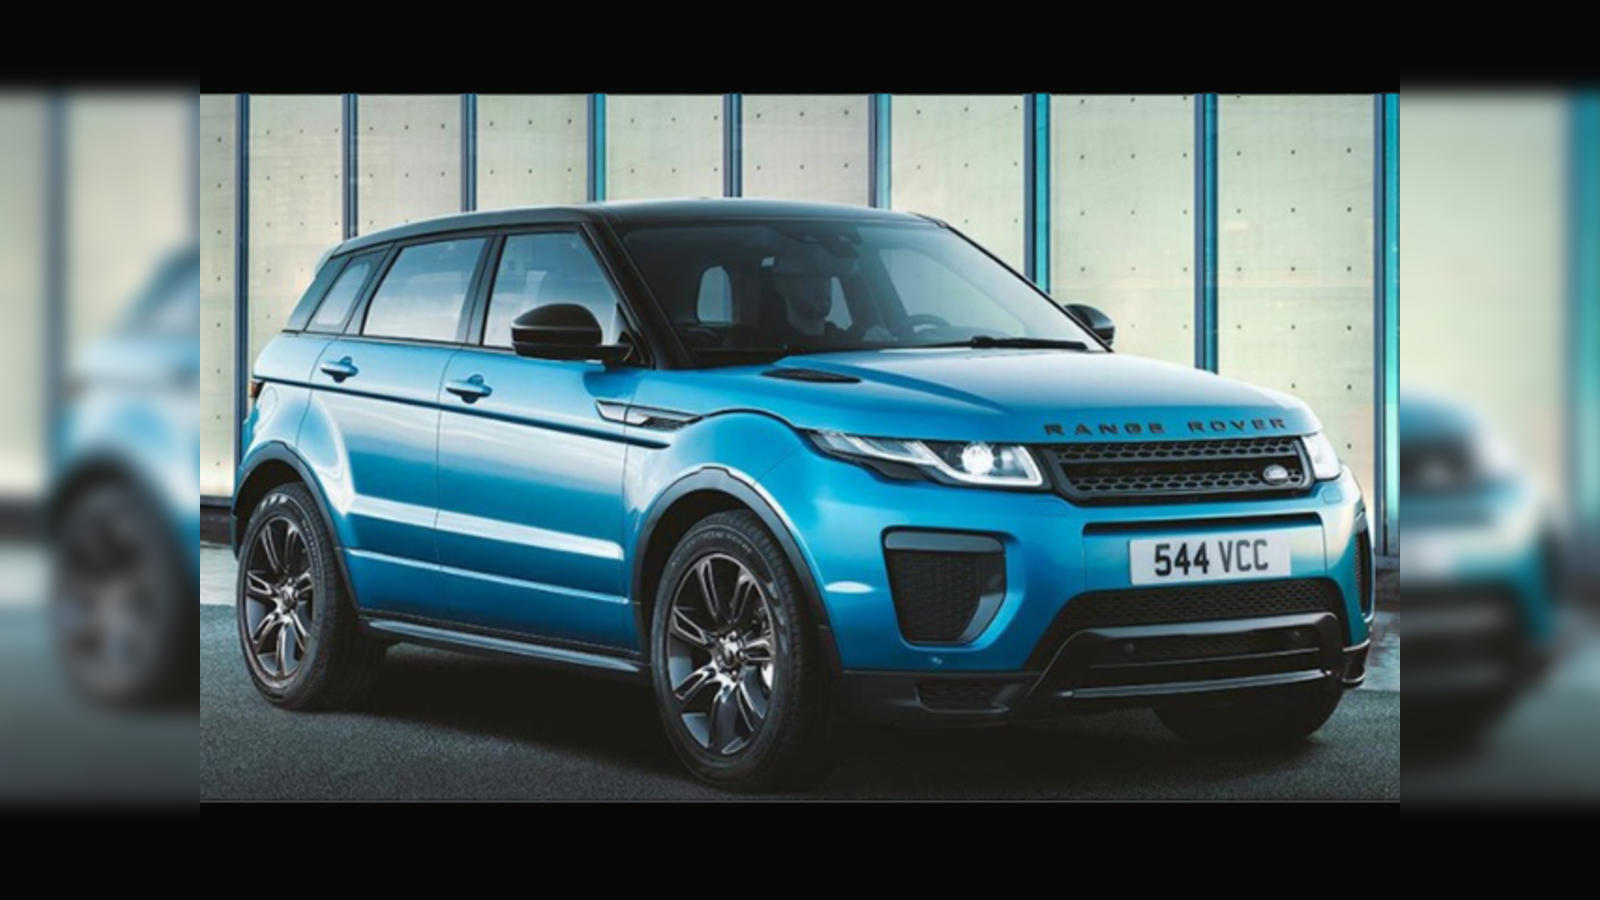 Rover Evoque: JLR unveils new Range Rover Evoque priced at Rs 50.20 lakh -  The Economic Times